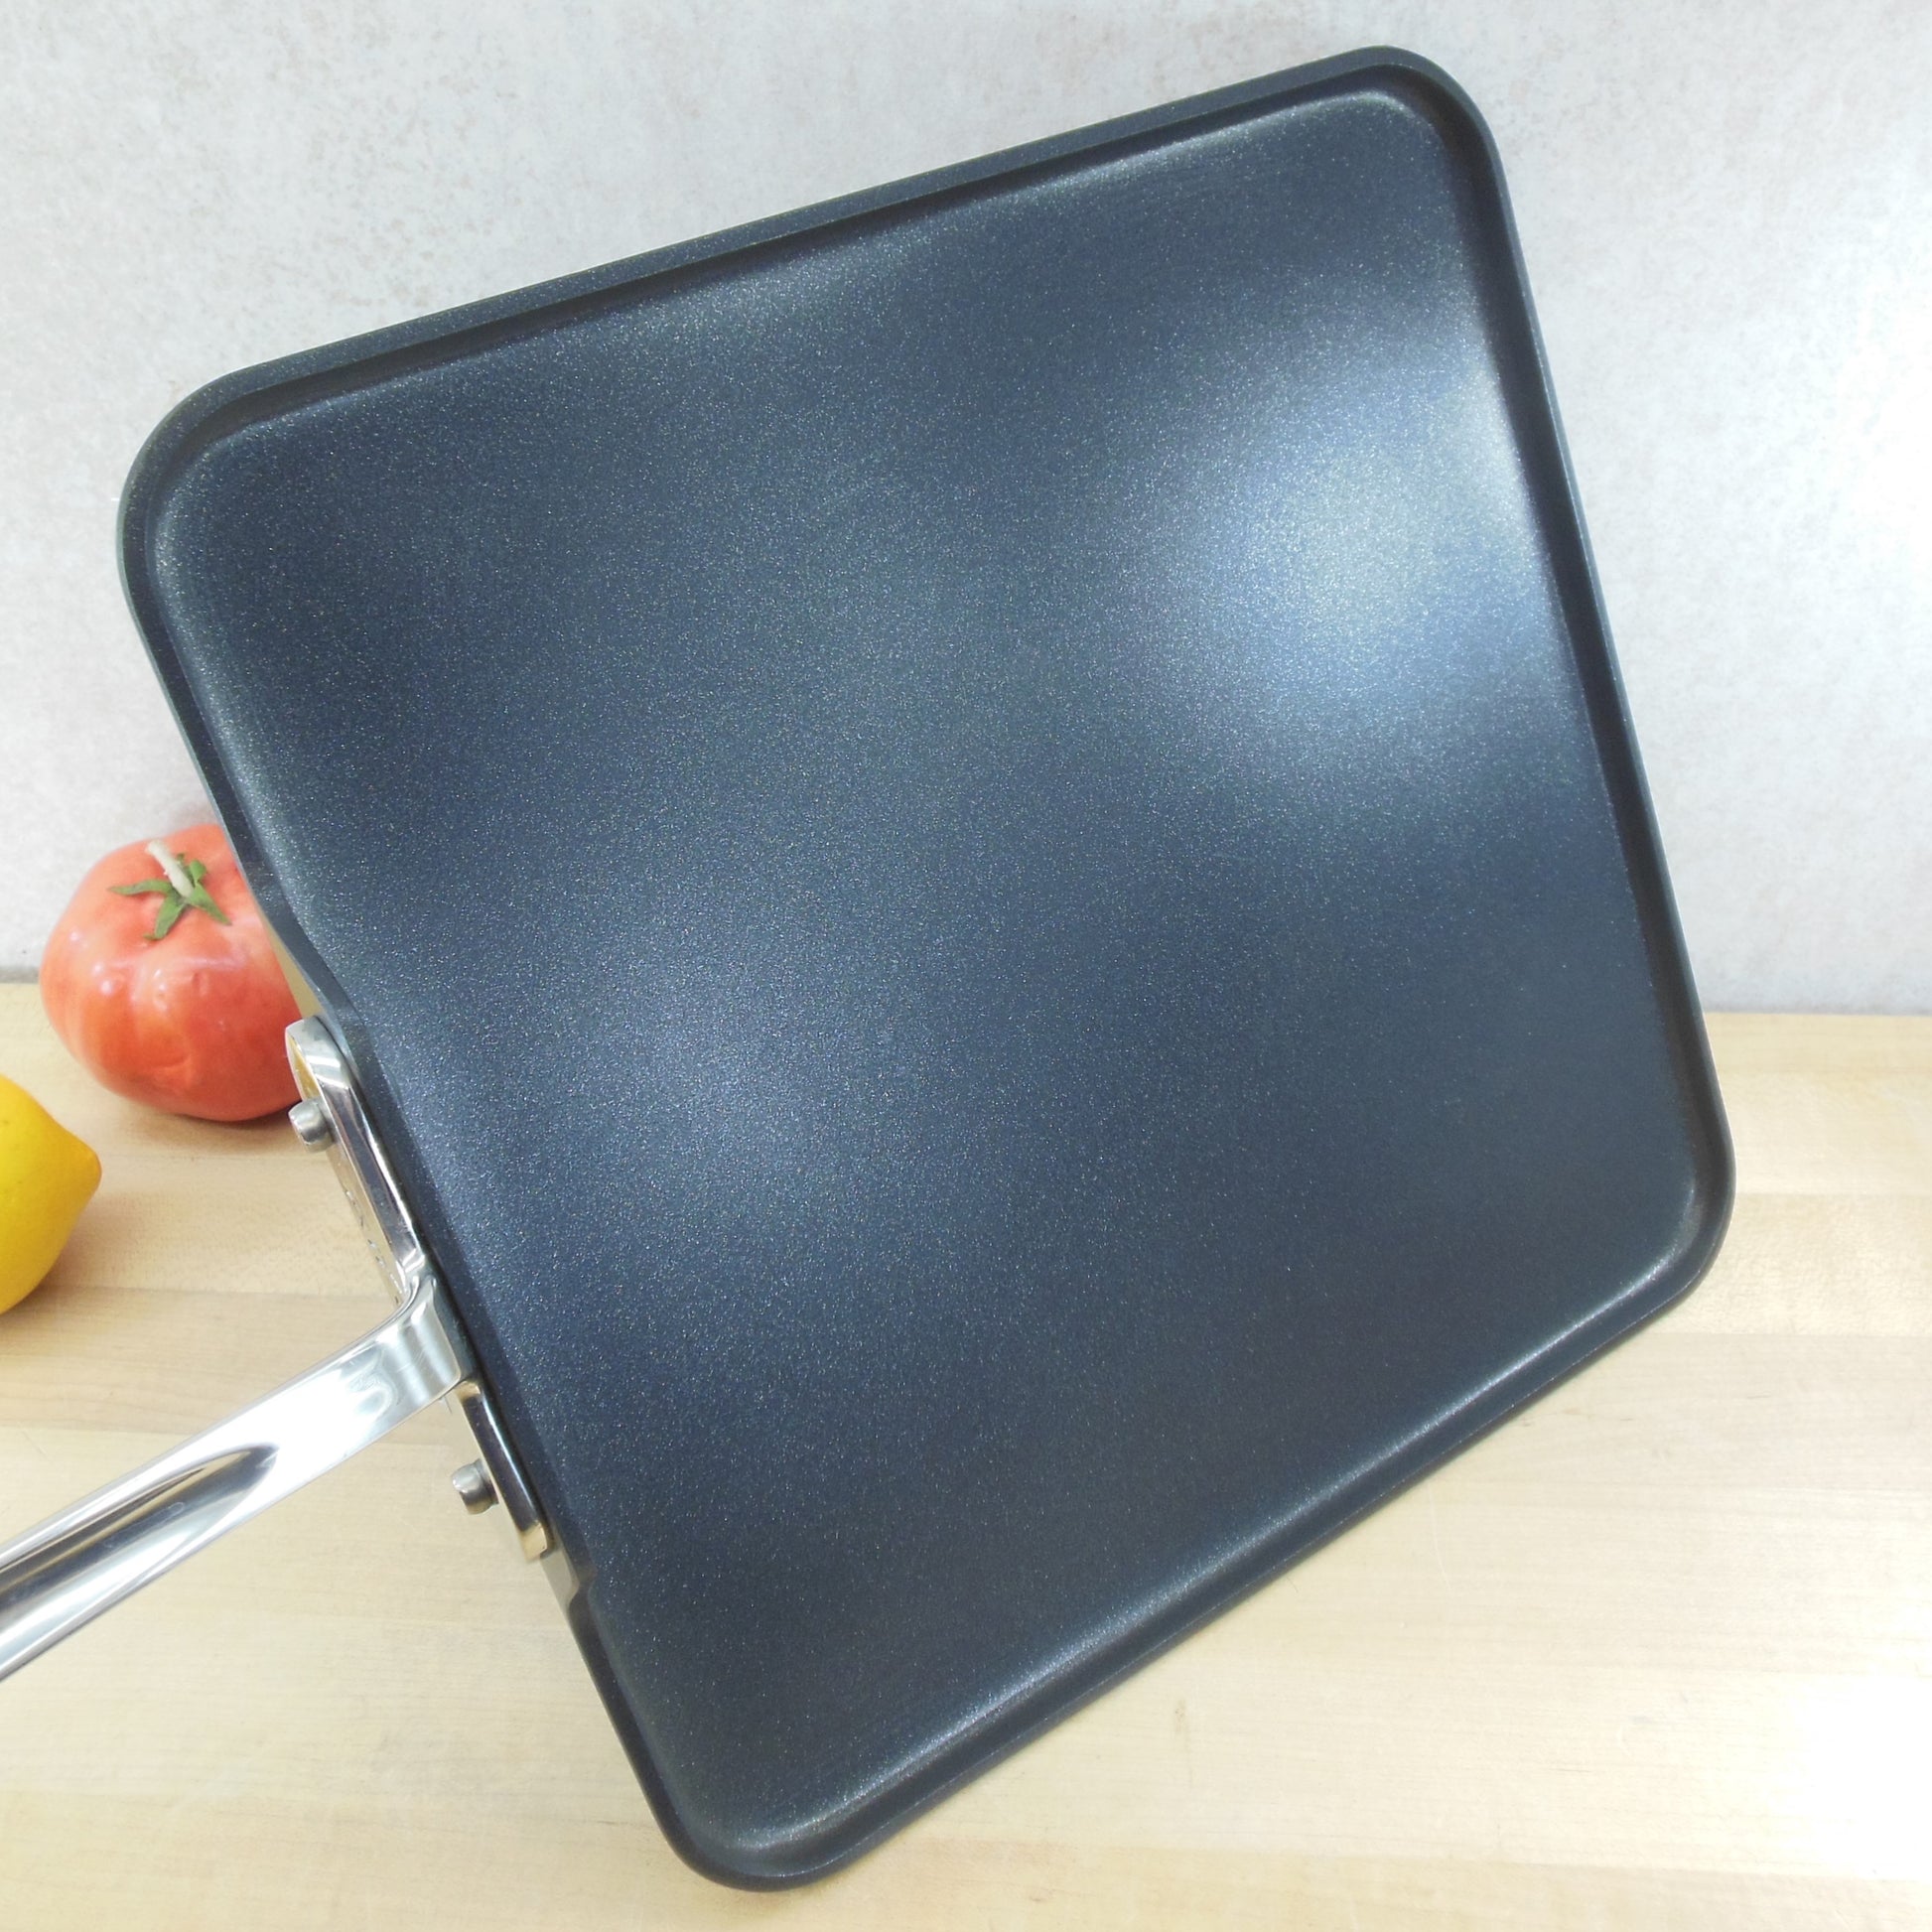 All-Clad Cast Iron Square Griddle, 11